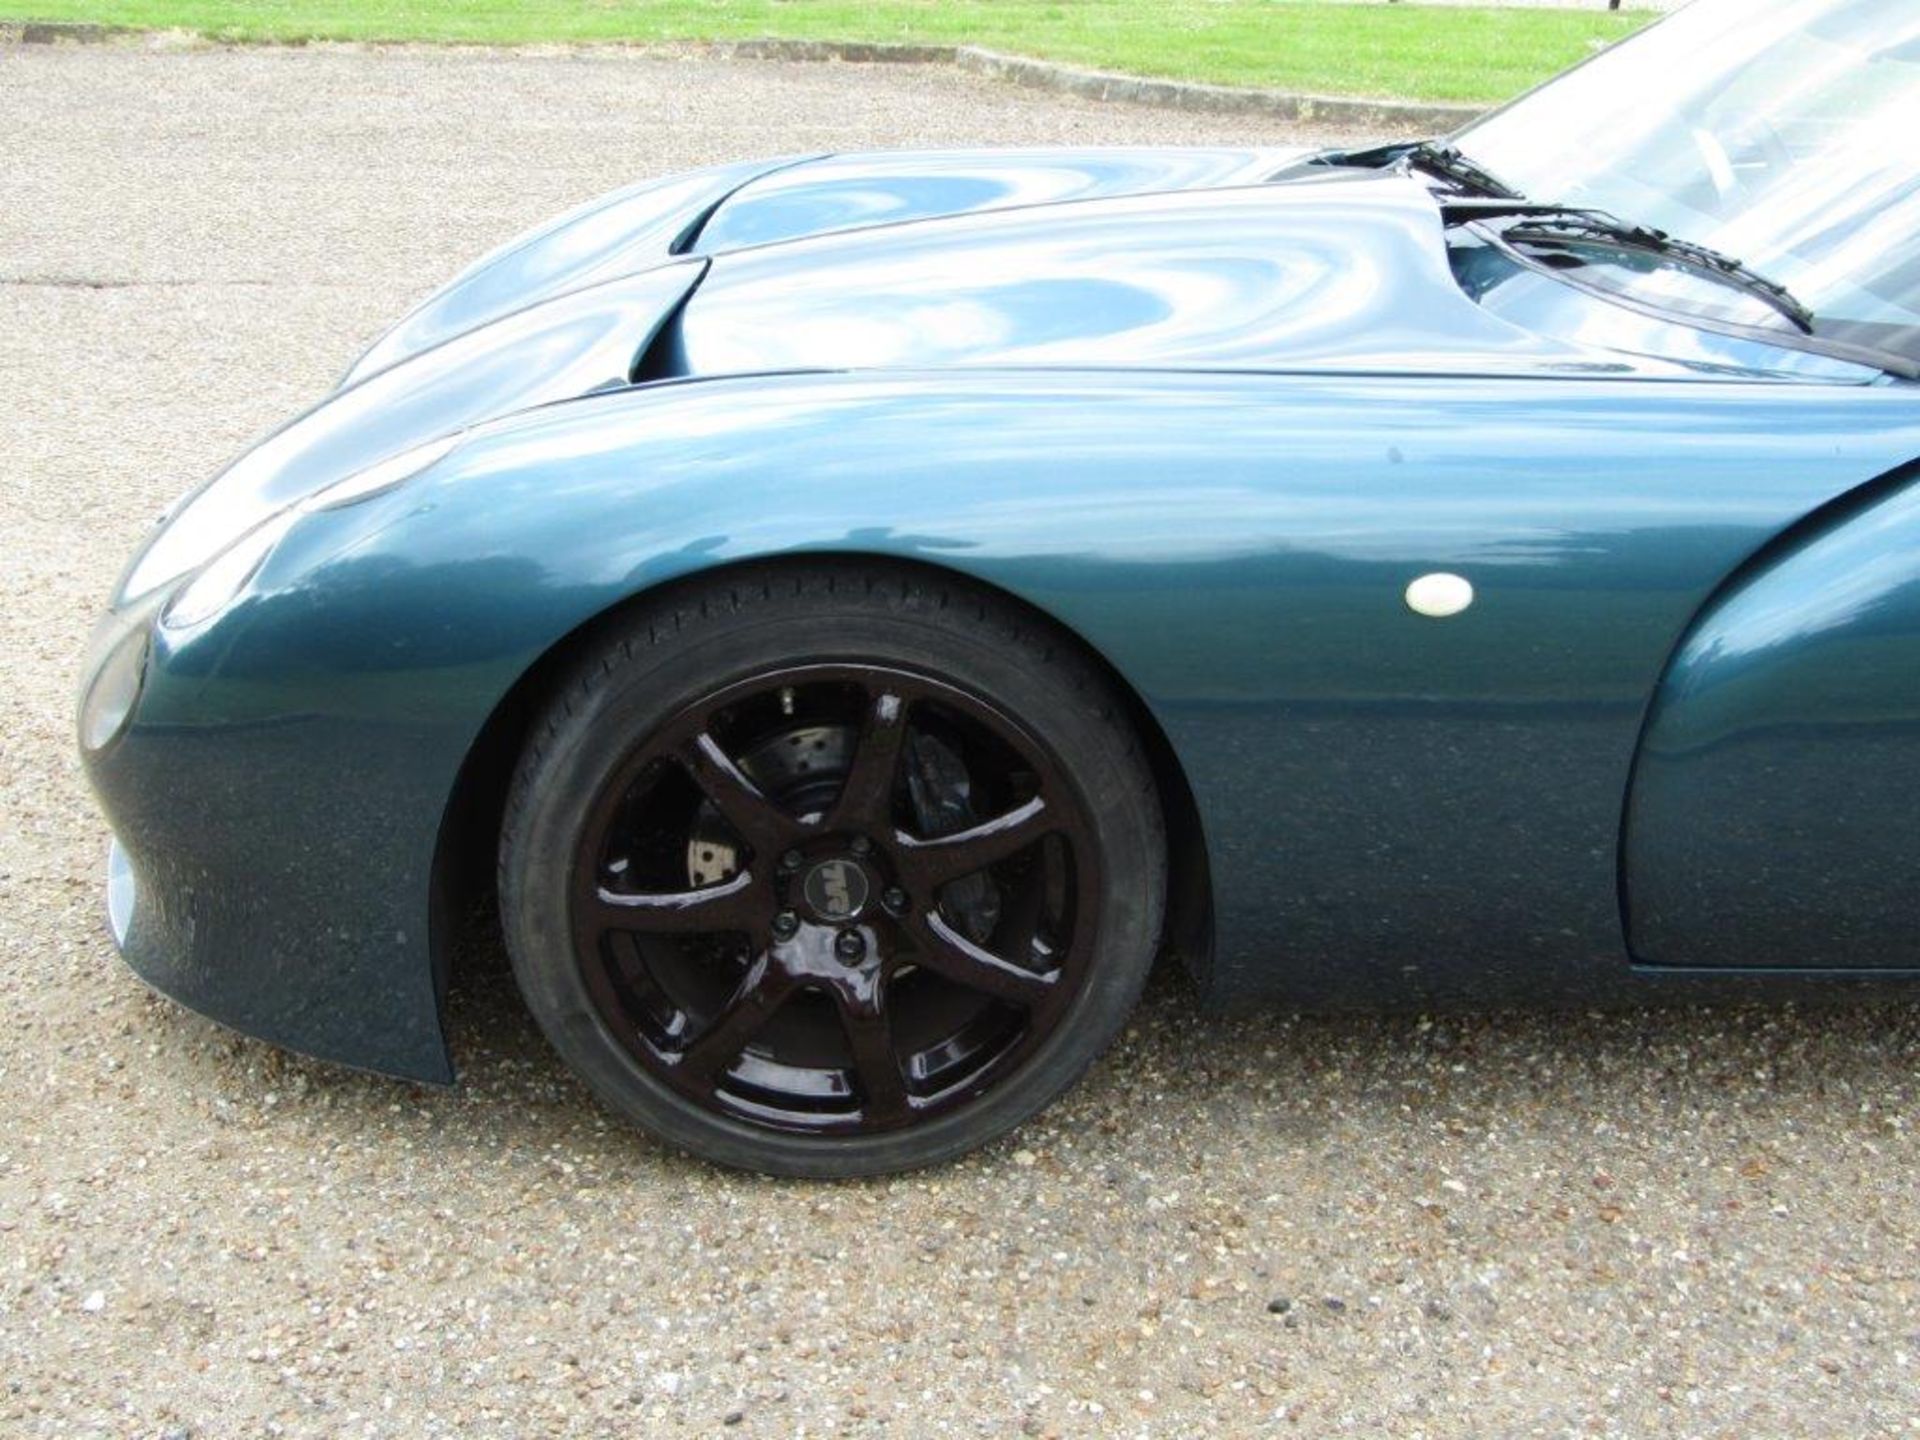 2000 TVR Tuscan 4.0 Speed Six - Image 4 of 16